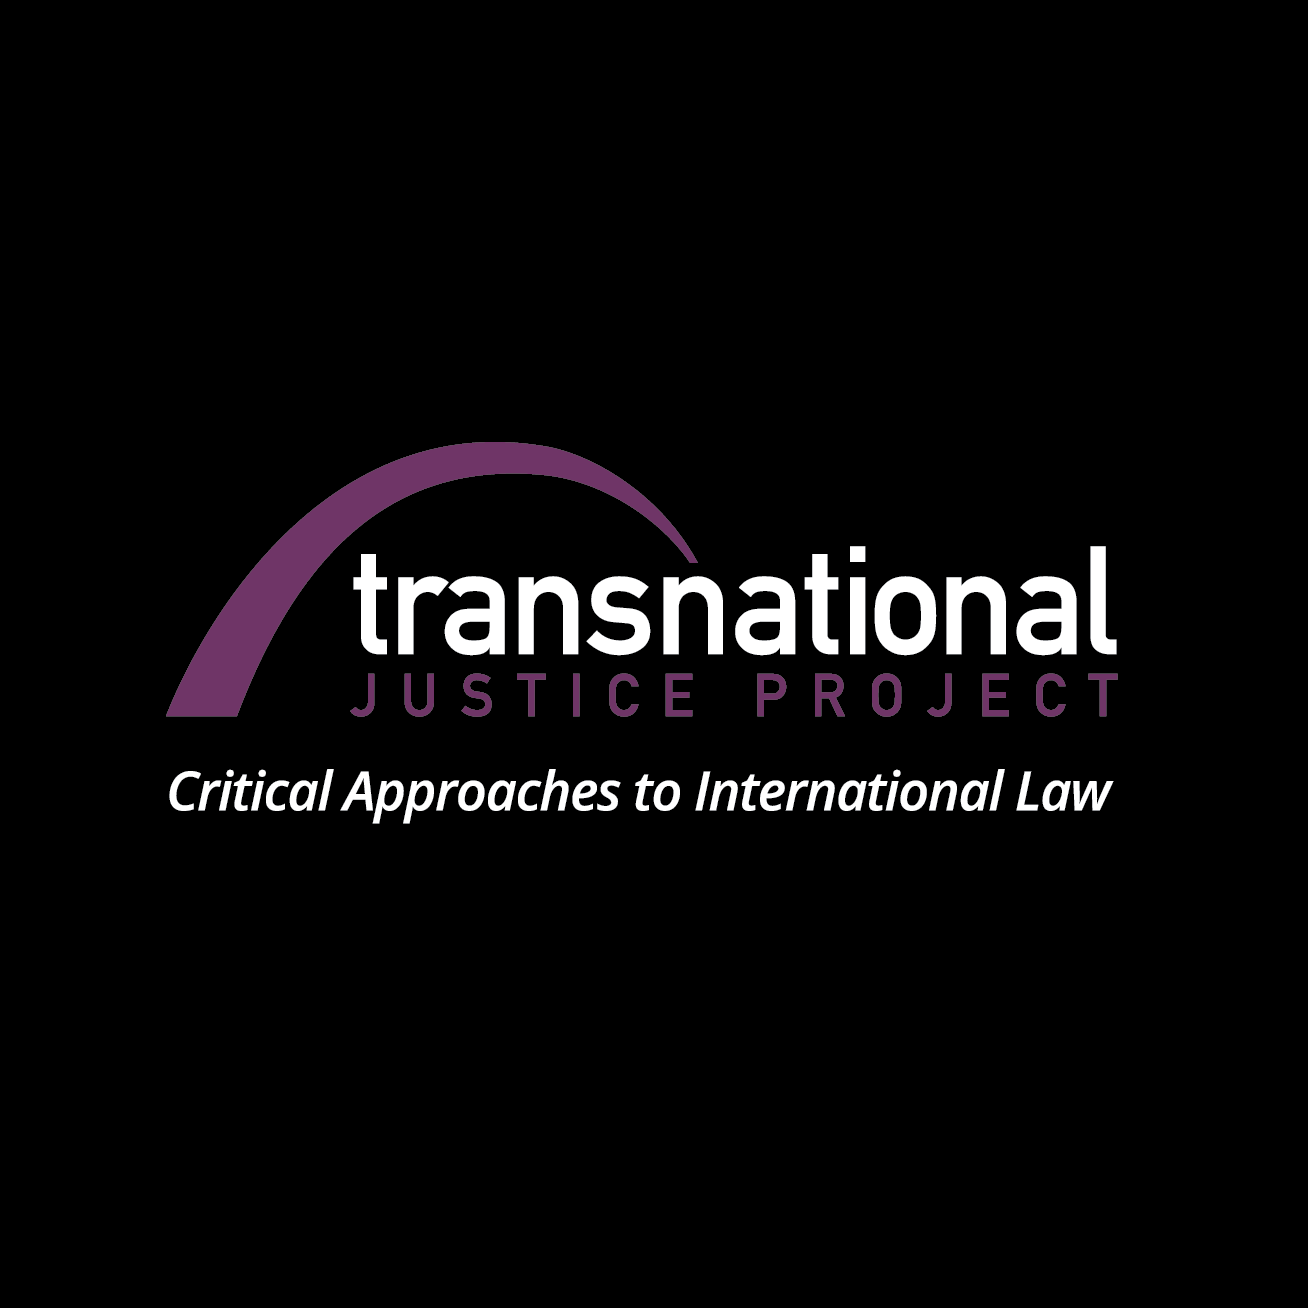 Transnational Justice Project